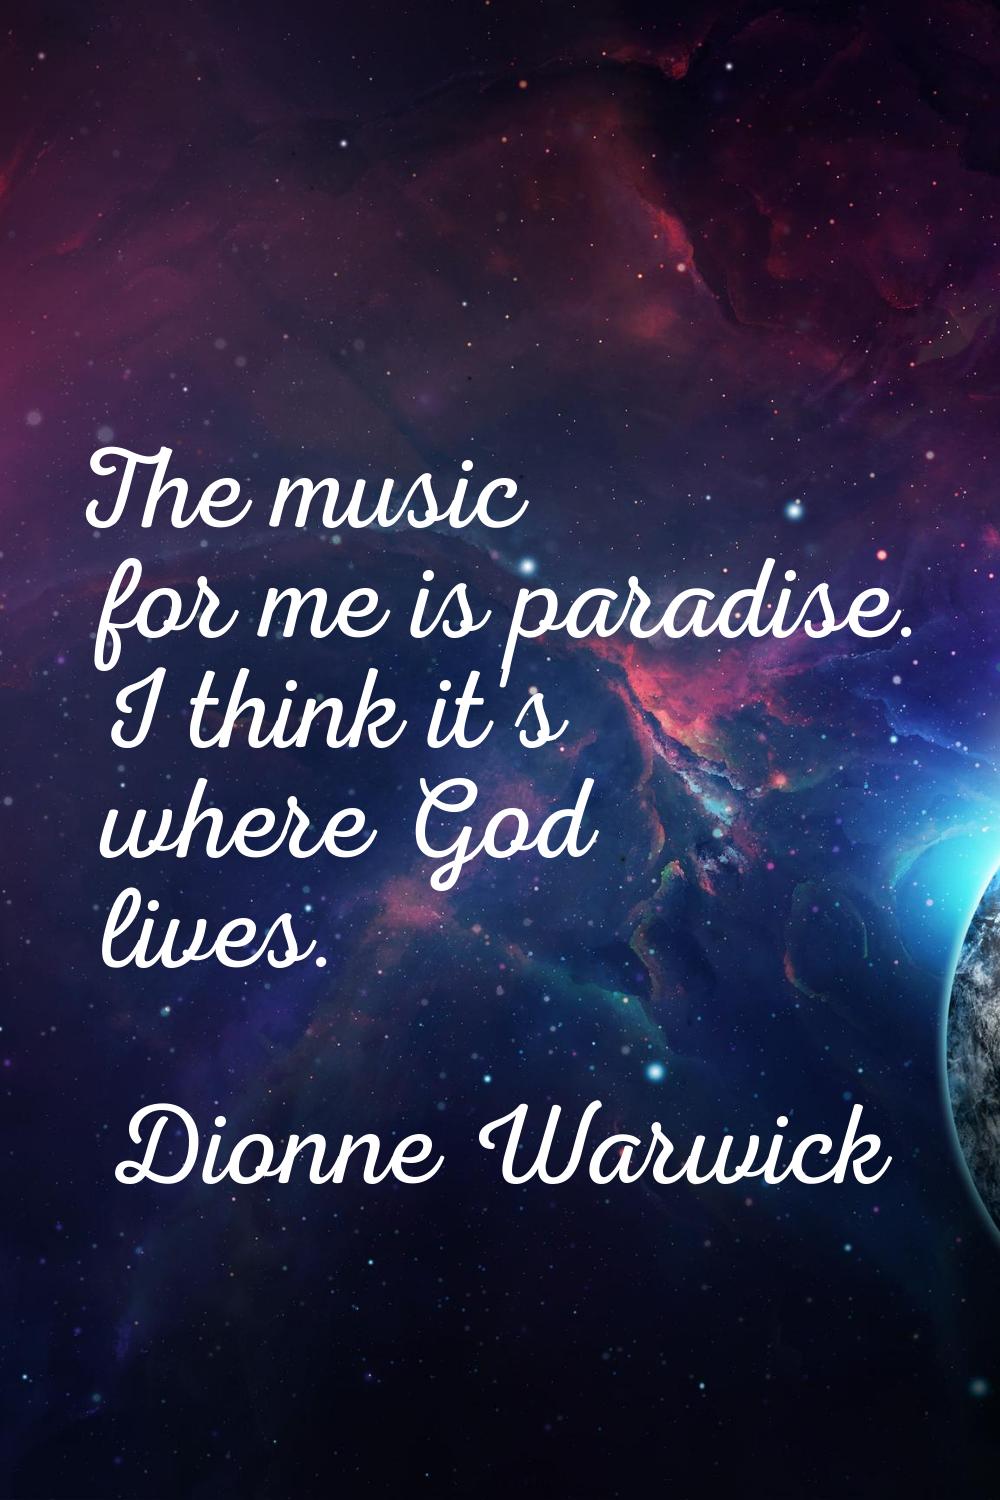 The music for me is paradise. I think it's where God lives.